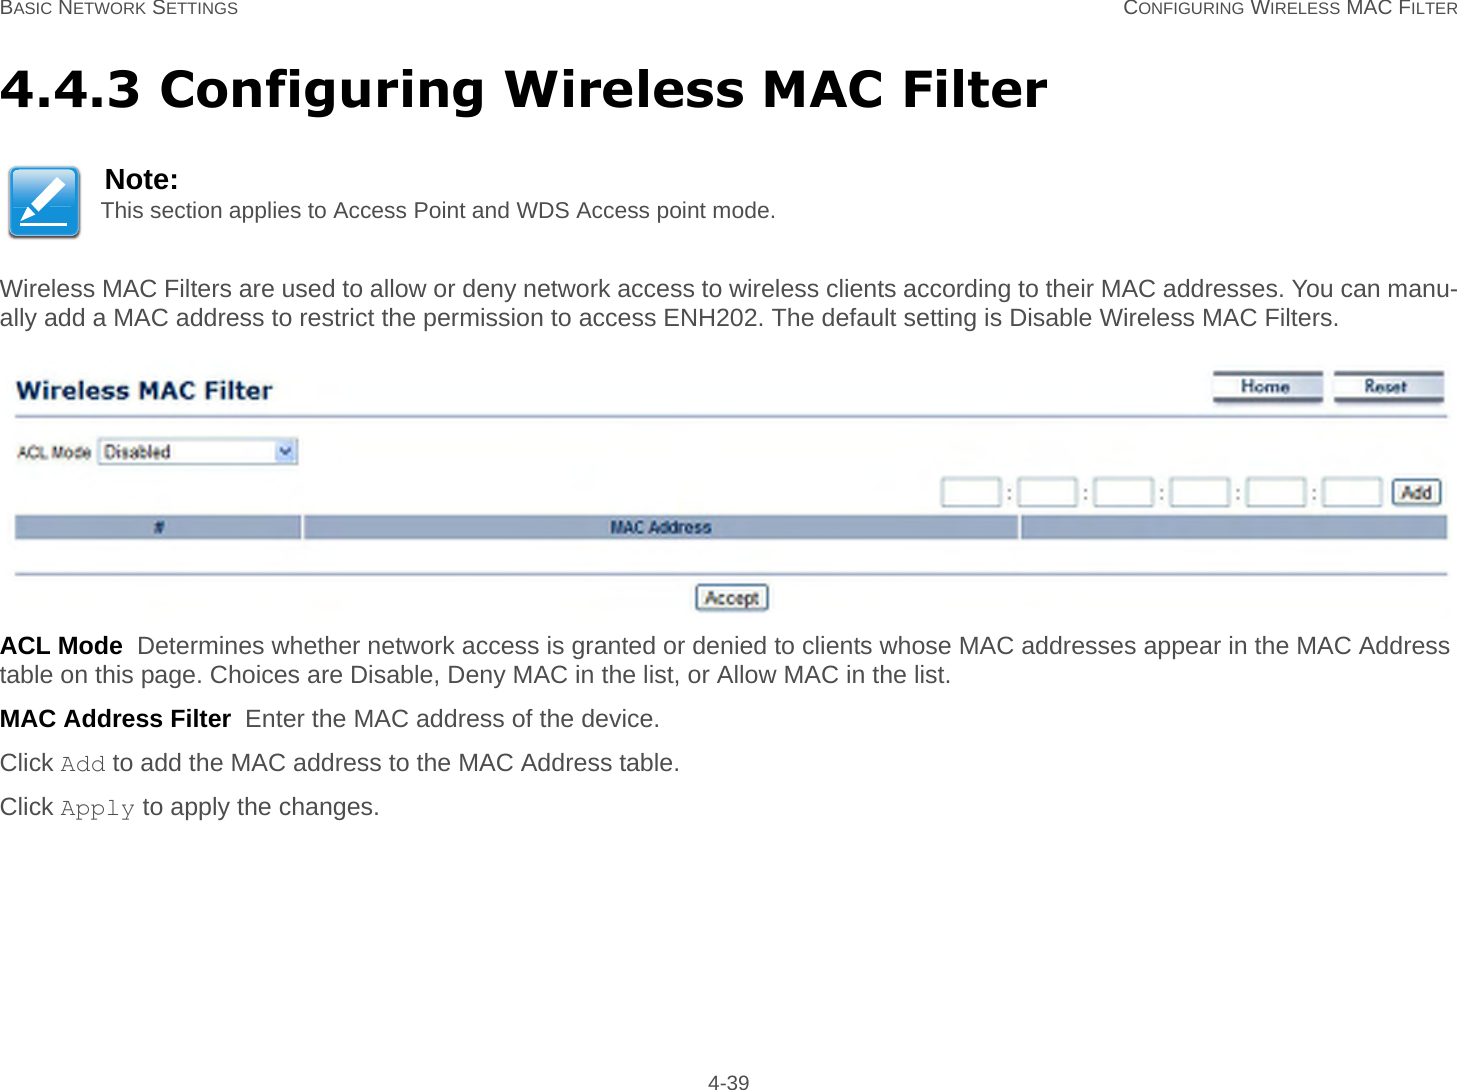 BASIC NETWORK SETTINGS CONFIGURING WIRELESS MAC FILTER 4-394.4.3 Configuring Wireless MAC FilterWireless MAC Filters are used to allow or deny network access to wireless clients according to their MAC addresses. You can manu-ally add a MAC address to restrict the permission to access ENH202. The default setting is Disable Wireless MAC Filters.ACL Mode  Determines whether network access is granted or denied to clients whose MAC addresses appear in the MAC Address table on this page. Choices are Disable, Deny MAC in the list, or Allow MAC in the list.MAC Address Filter  Enter the MAC address of the device.Click Add to add the MAC address to the MAC Address table.Click Apply to apply the changes.Note:This section applies to Access Point and WDS Access point mode.